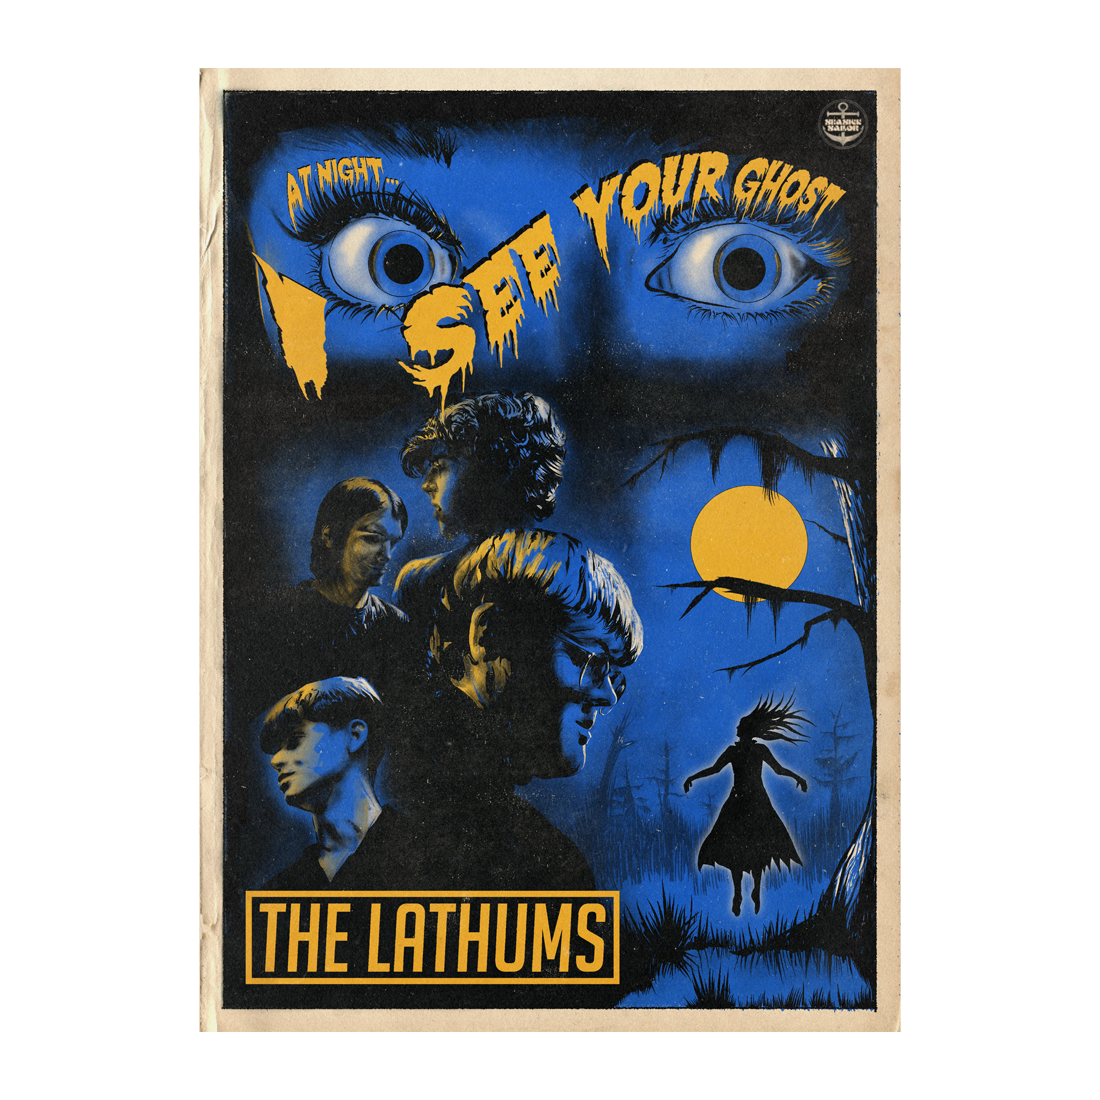 The Lathums - I SEE YOUR GHOST A3 NUMBERED SCREENPRINT